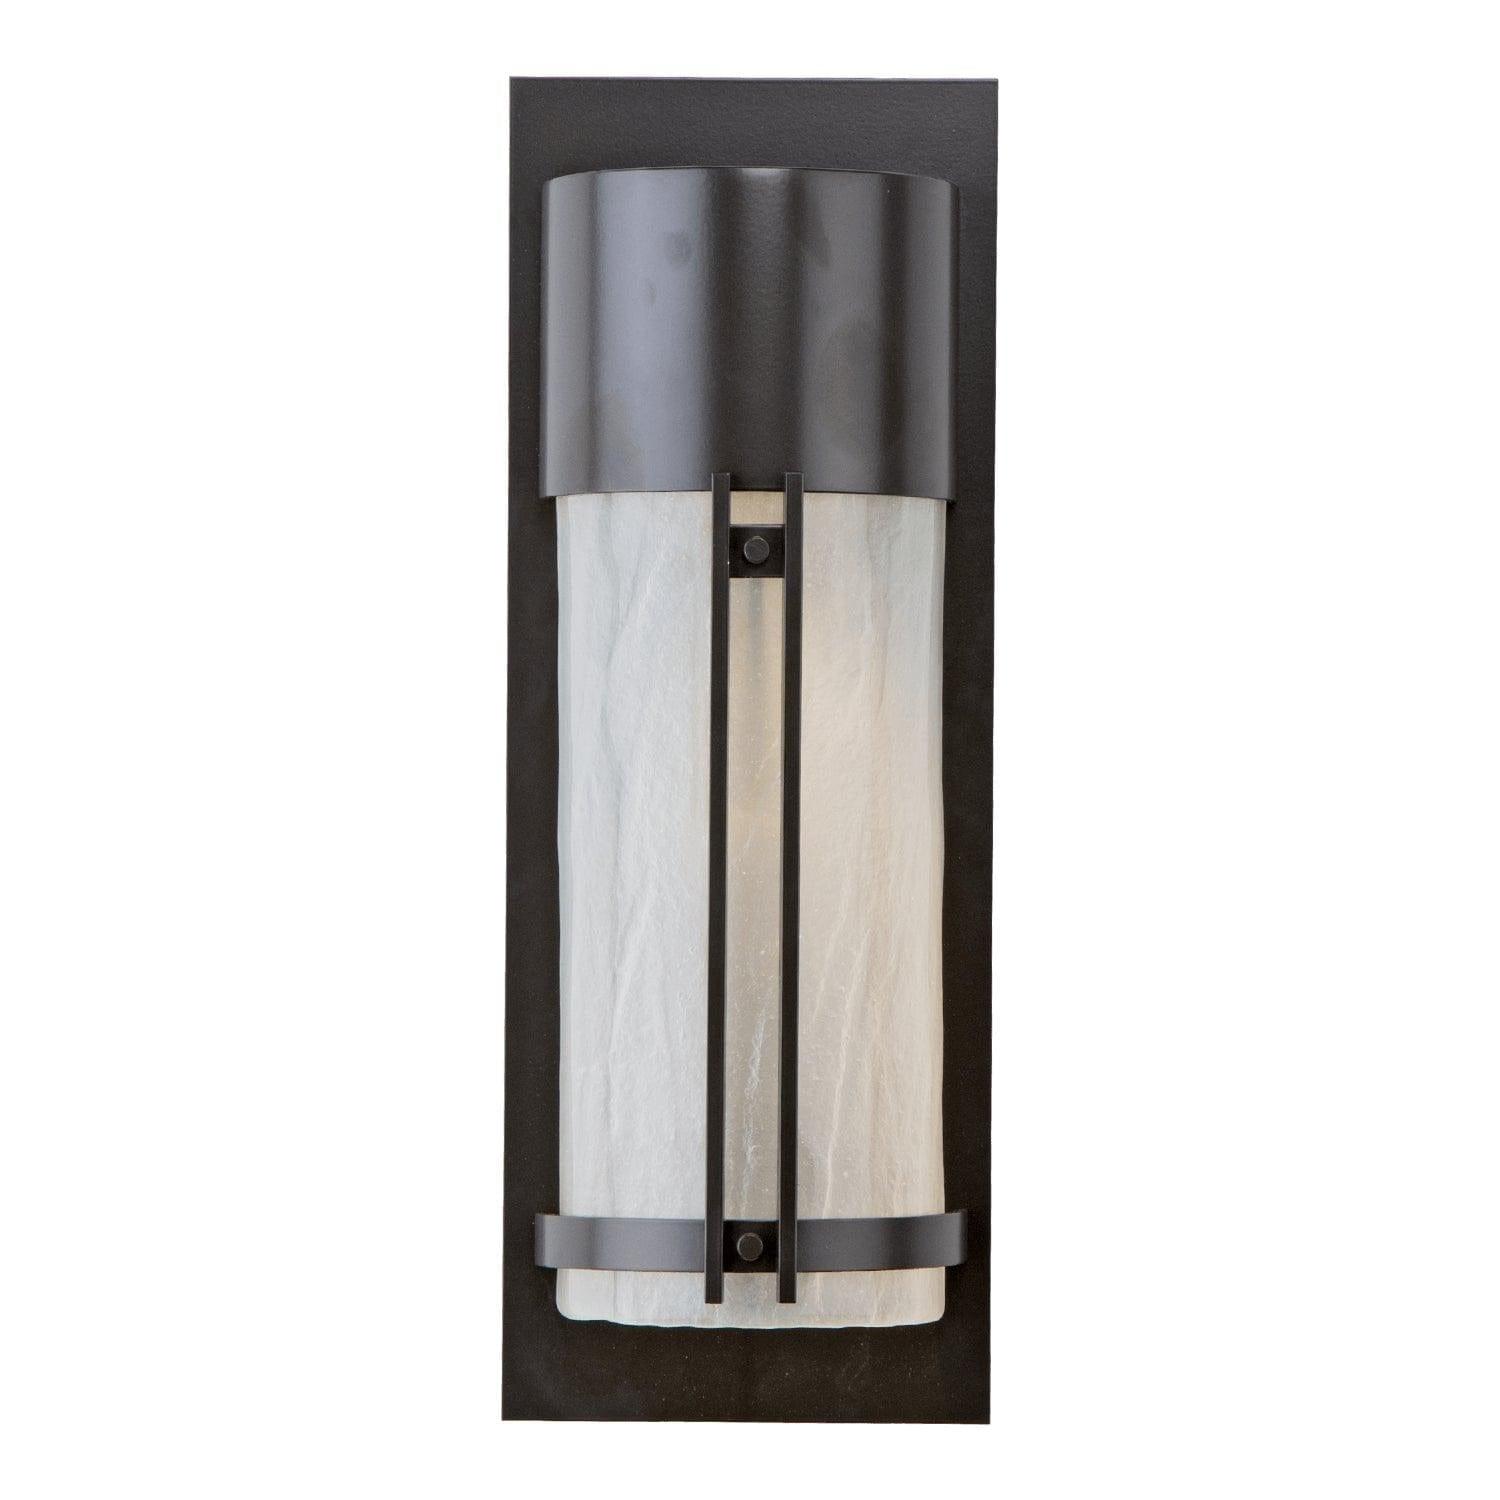 Hammerton Studio - Outdoor Short Round Cover Sconce with Metalwork - ODB0054-19-SB-FG-L2 | Montreal Lighting & Hardware